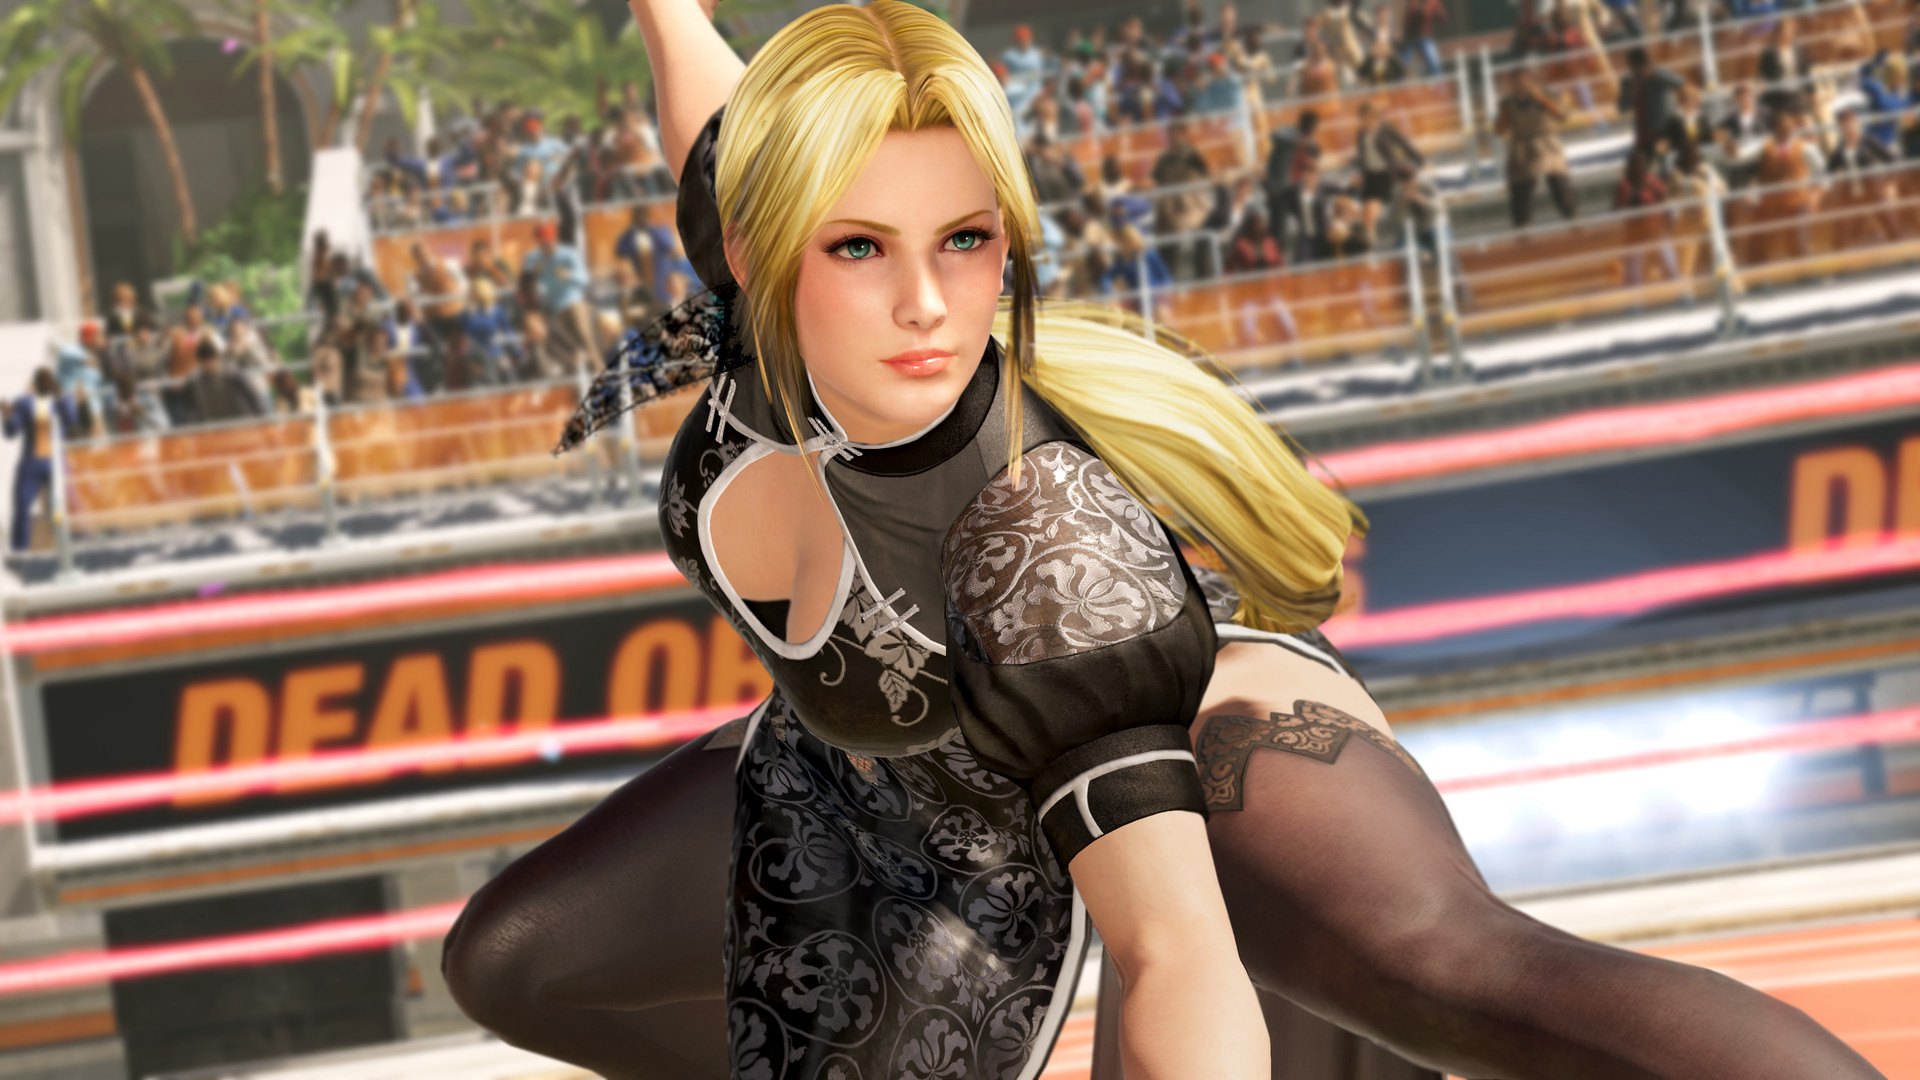 DEAD OR ALIVE 6 Digital Deluxe Edition Steam CD Key